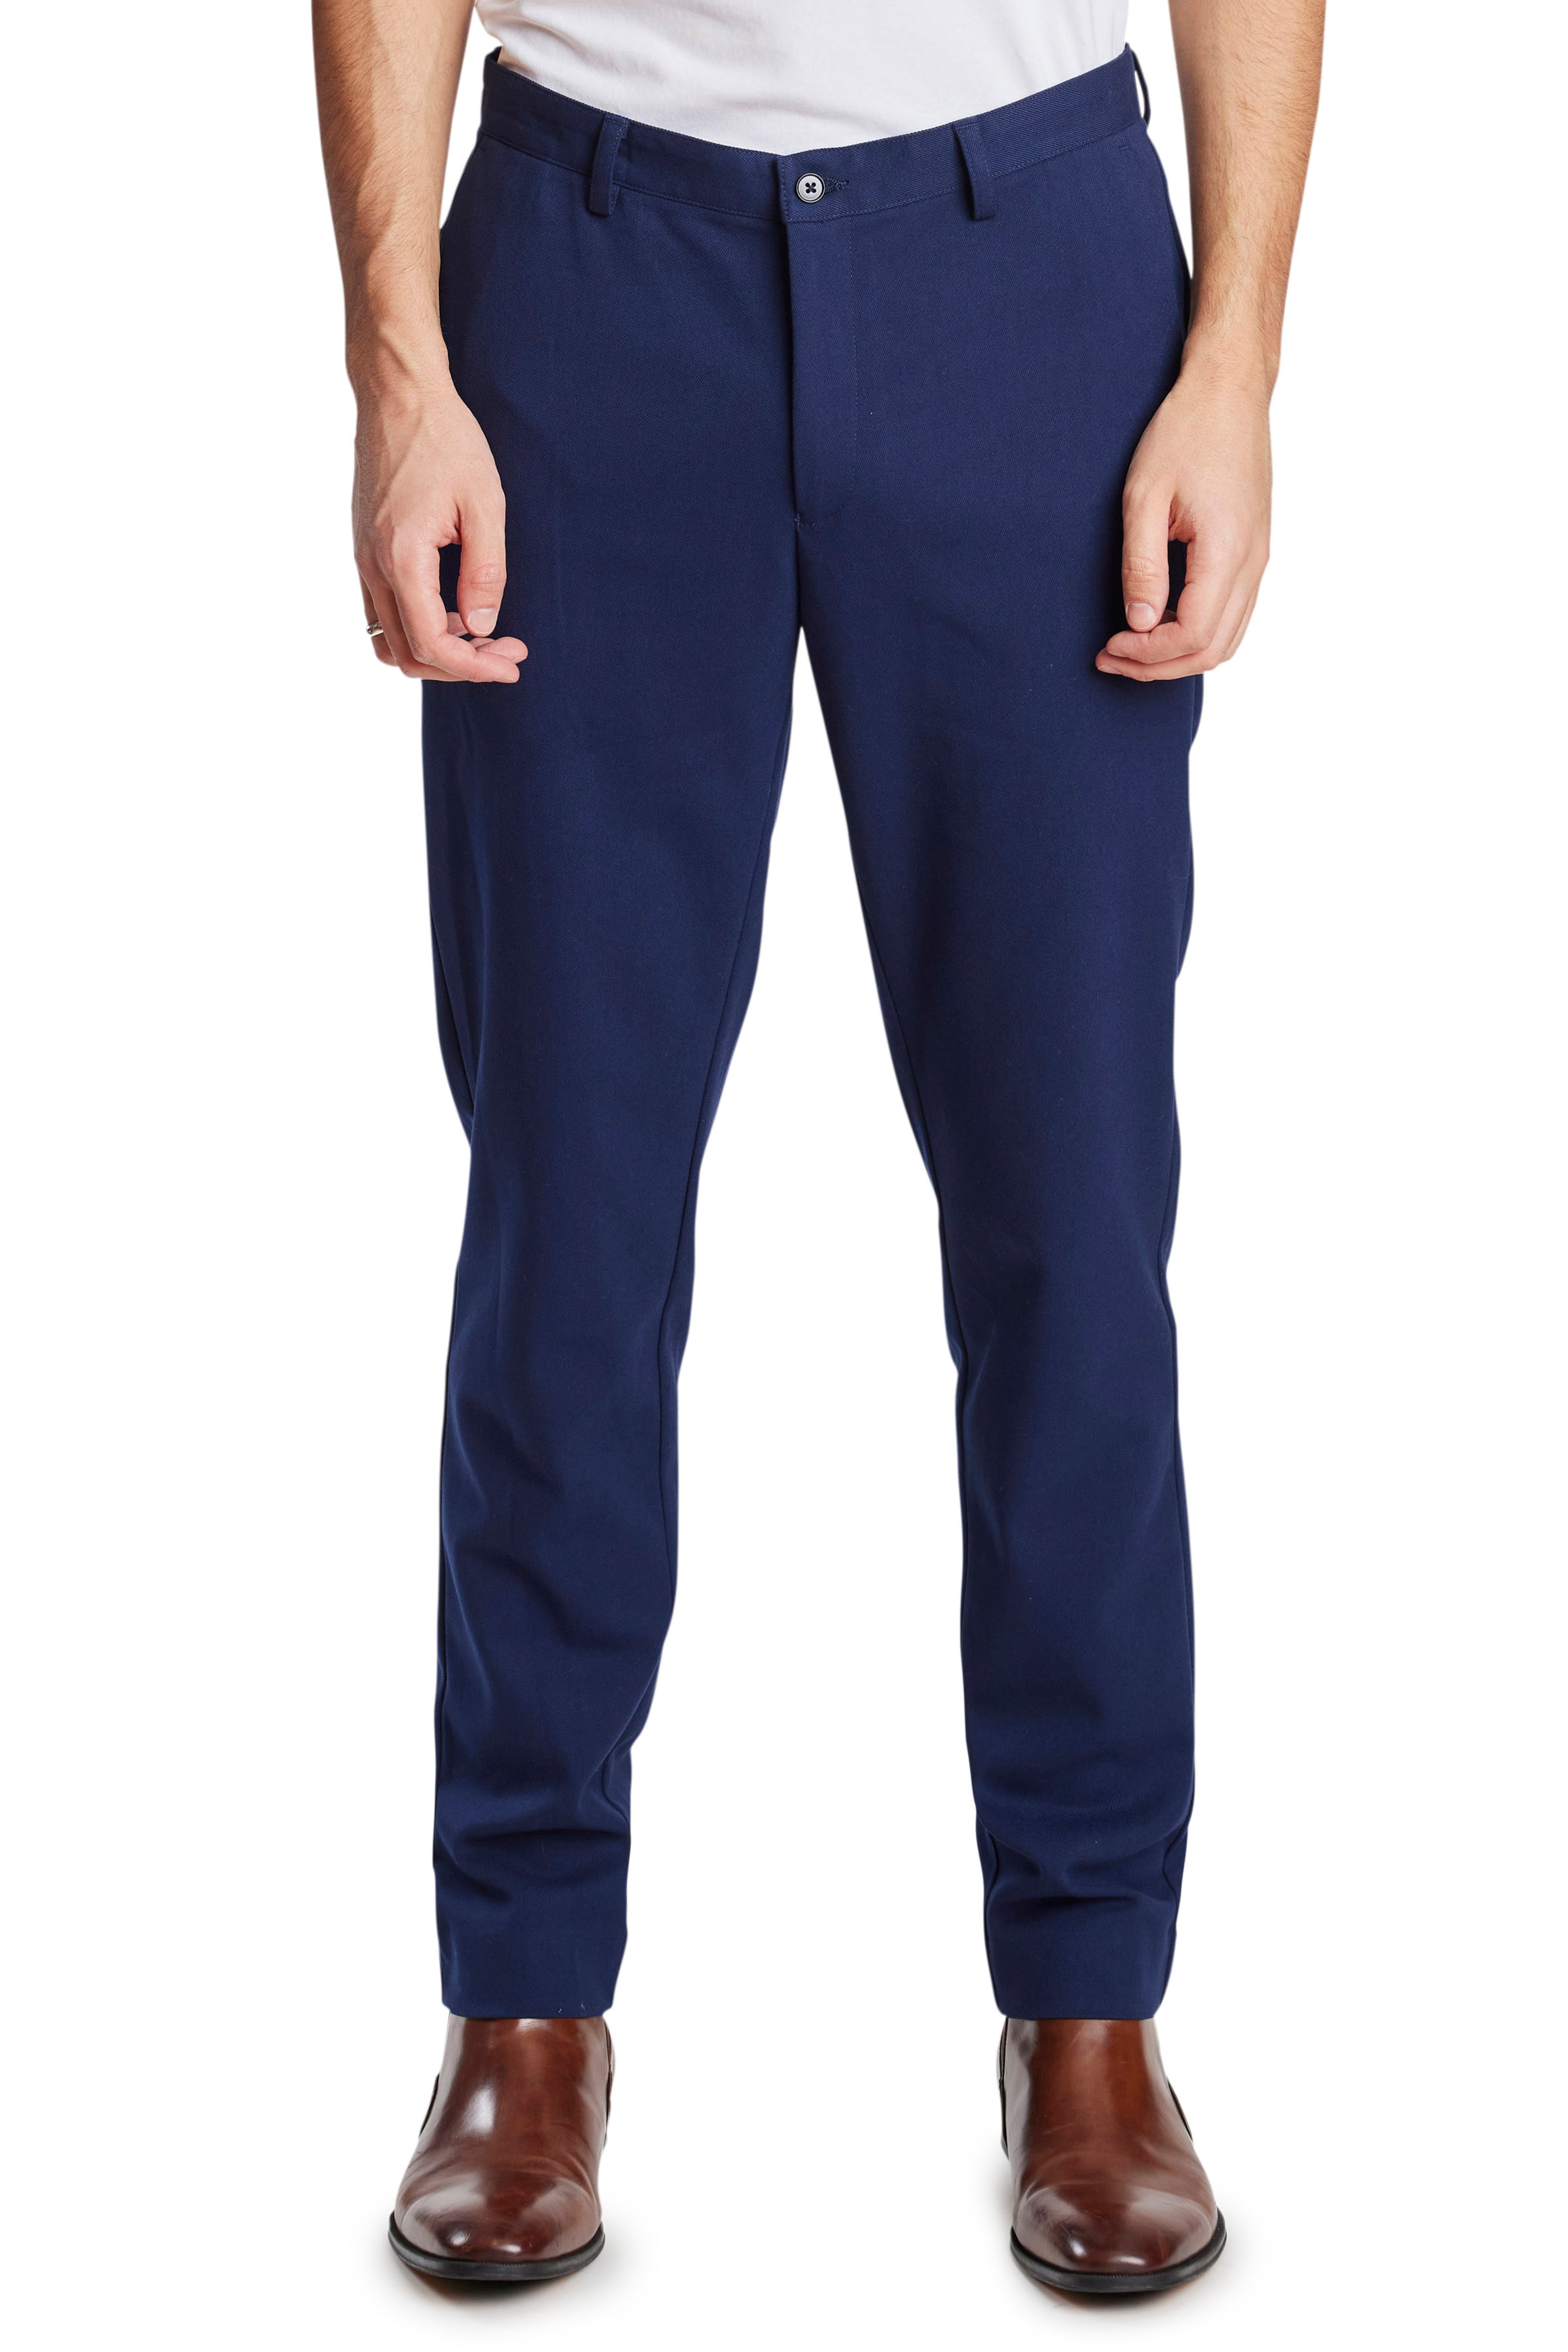 UBIC Space Blue Regular Fit Cotton Chinos | Formal Pants | Regular Fit  Trouser | Track Pants for Men Pack-1 (Size - S to XL) (S, Space Blue) :  Amazon.in: Clothing & Accessories